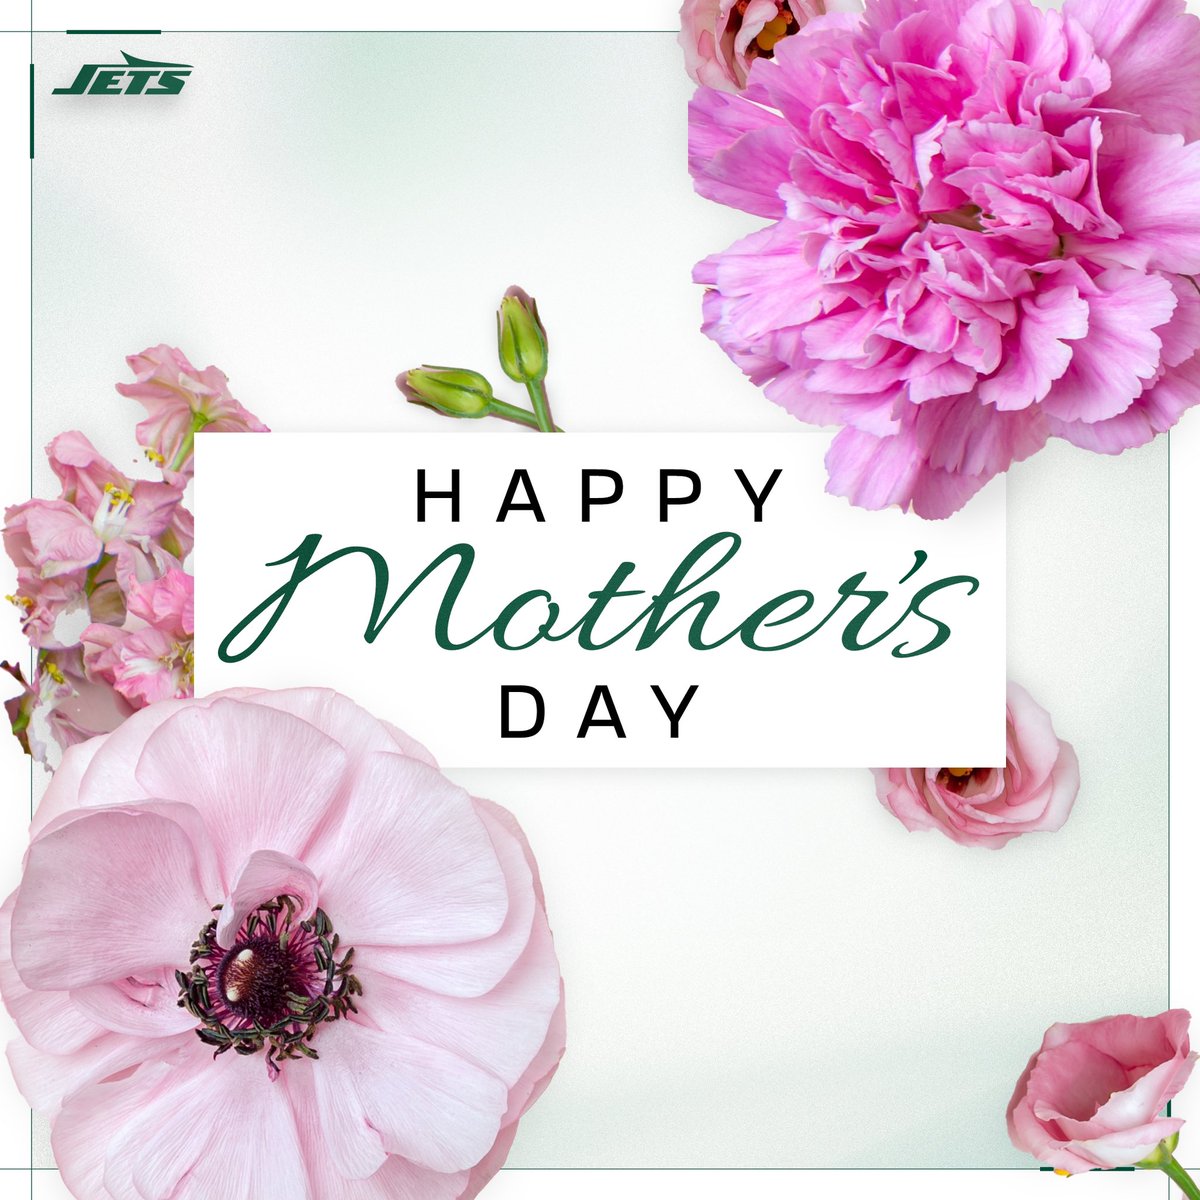 Happy Mother’s Day to all the great moms and all they do for us.